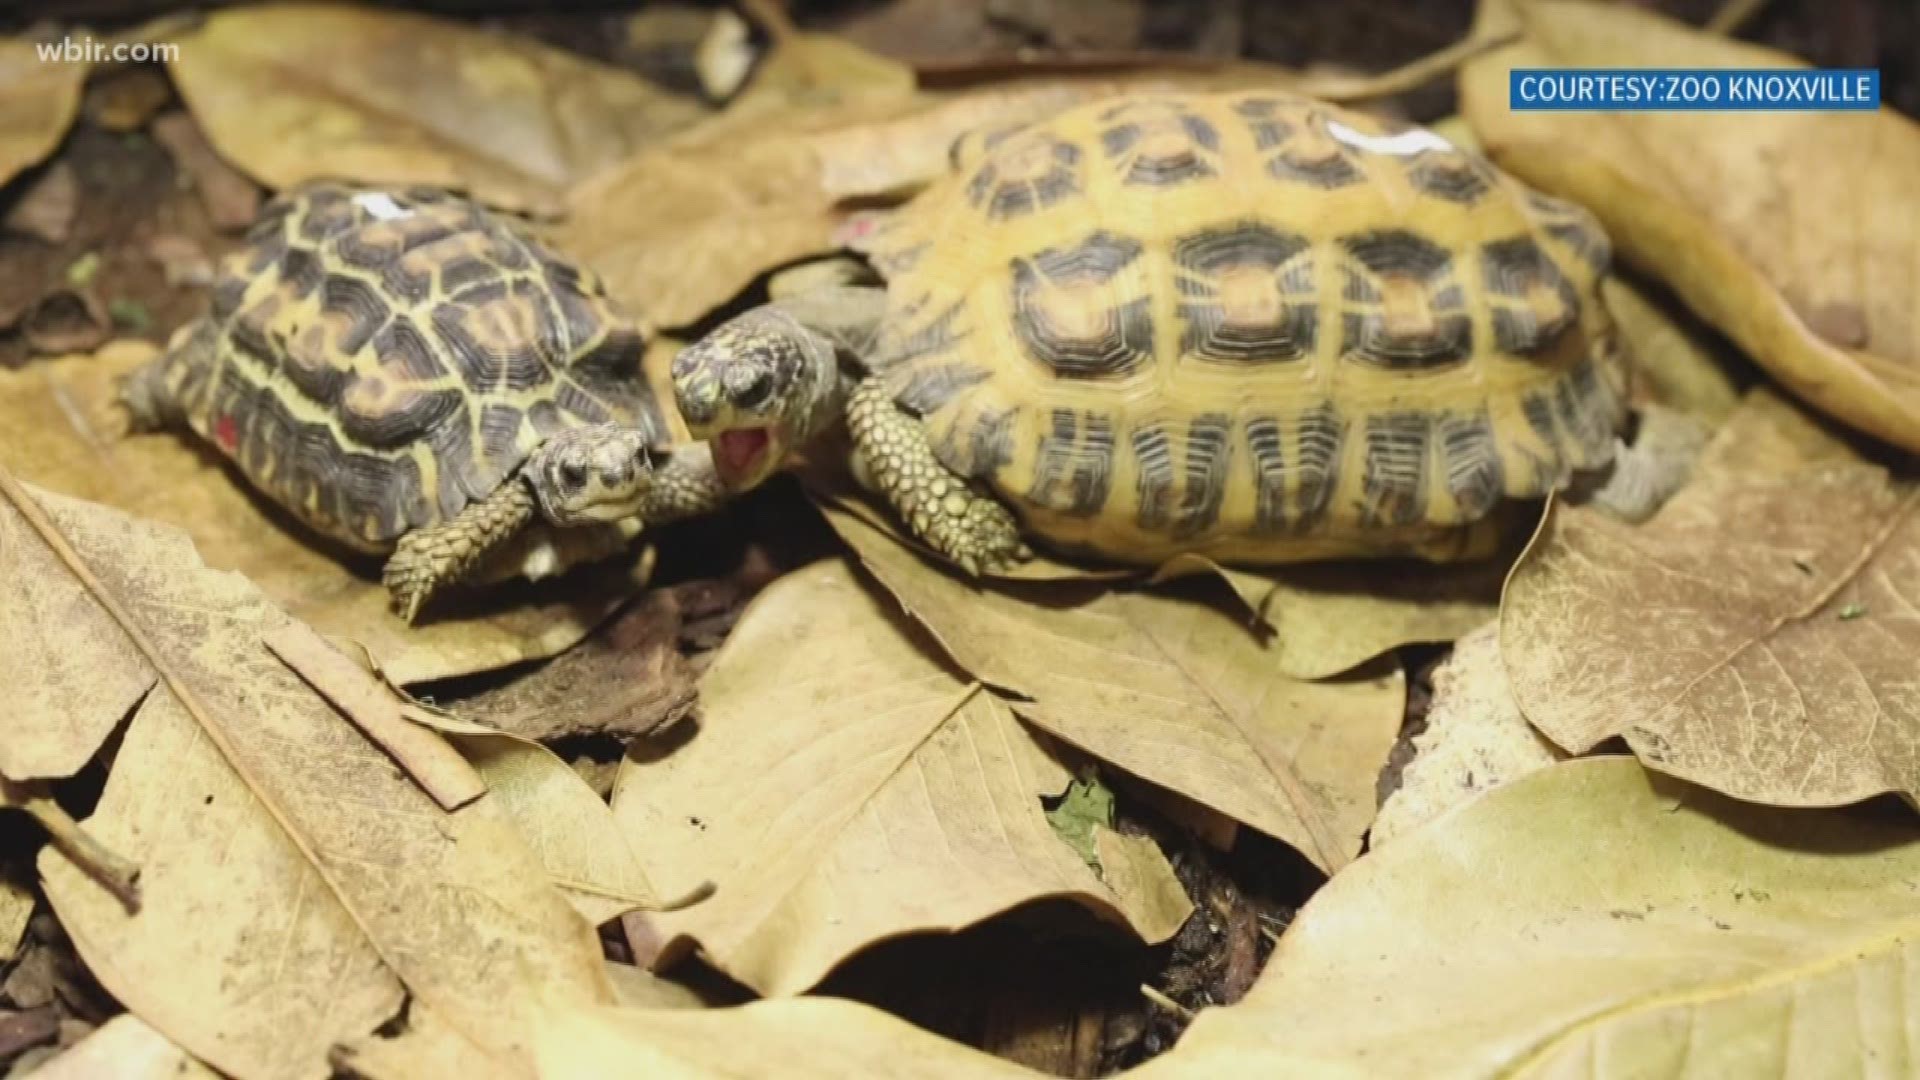 World Turtle Day is coming up this week, and Zoo Knoxville is celebrating it as one of the greatest days of the year.